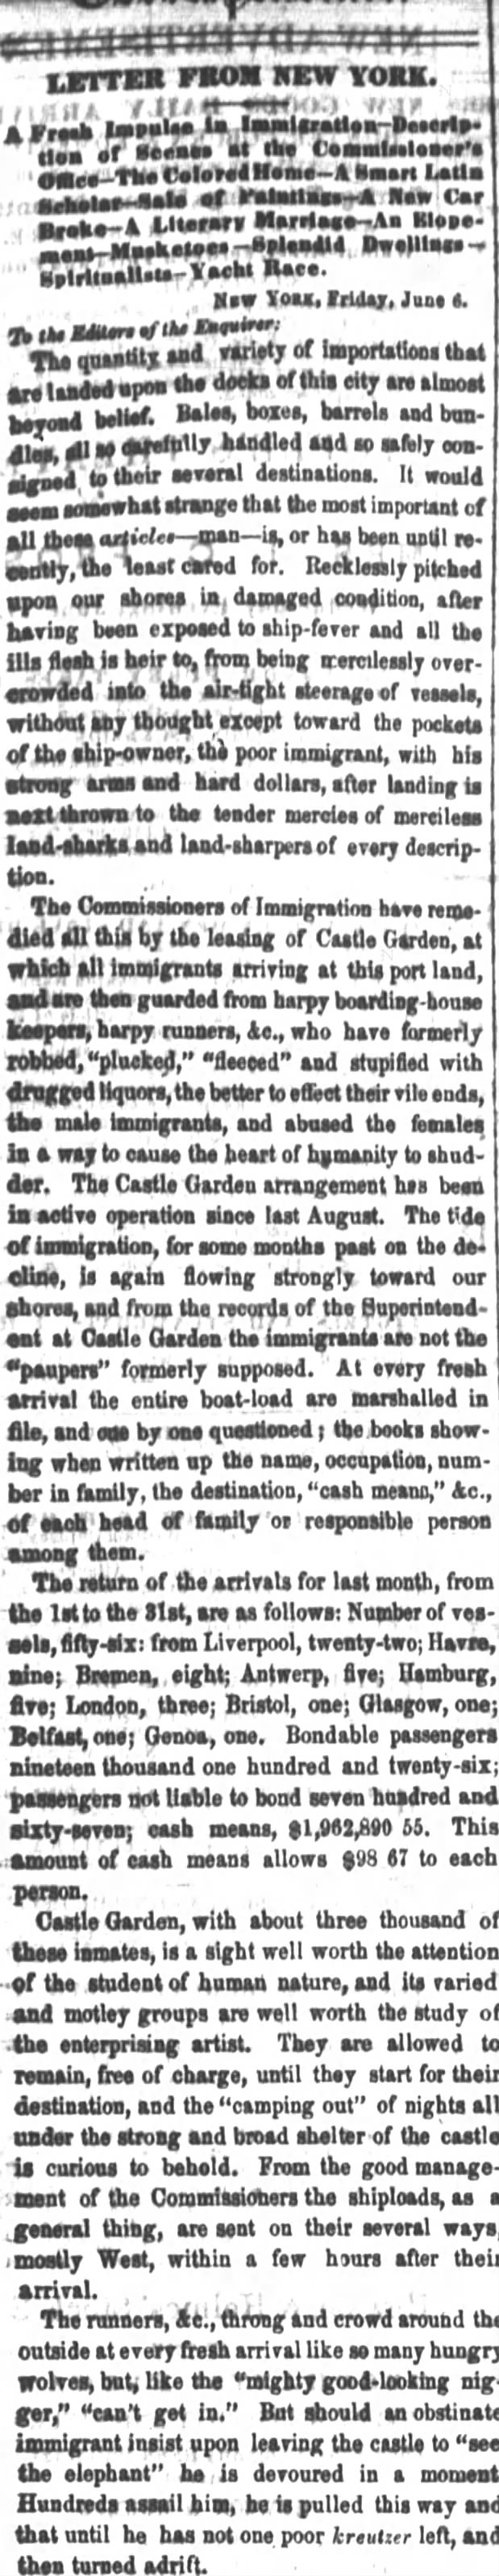 On immigrants and Castle Garden